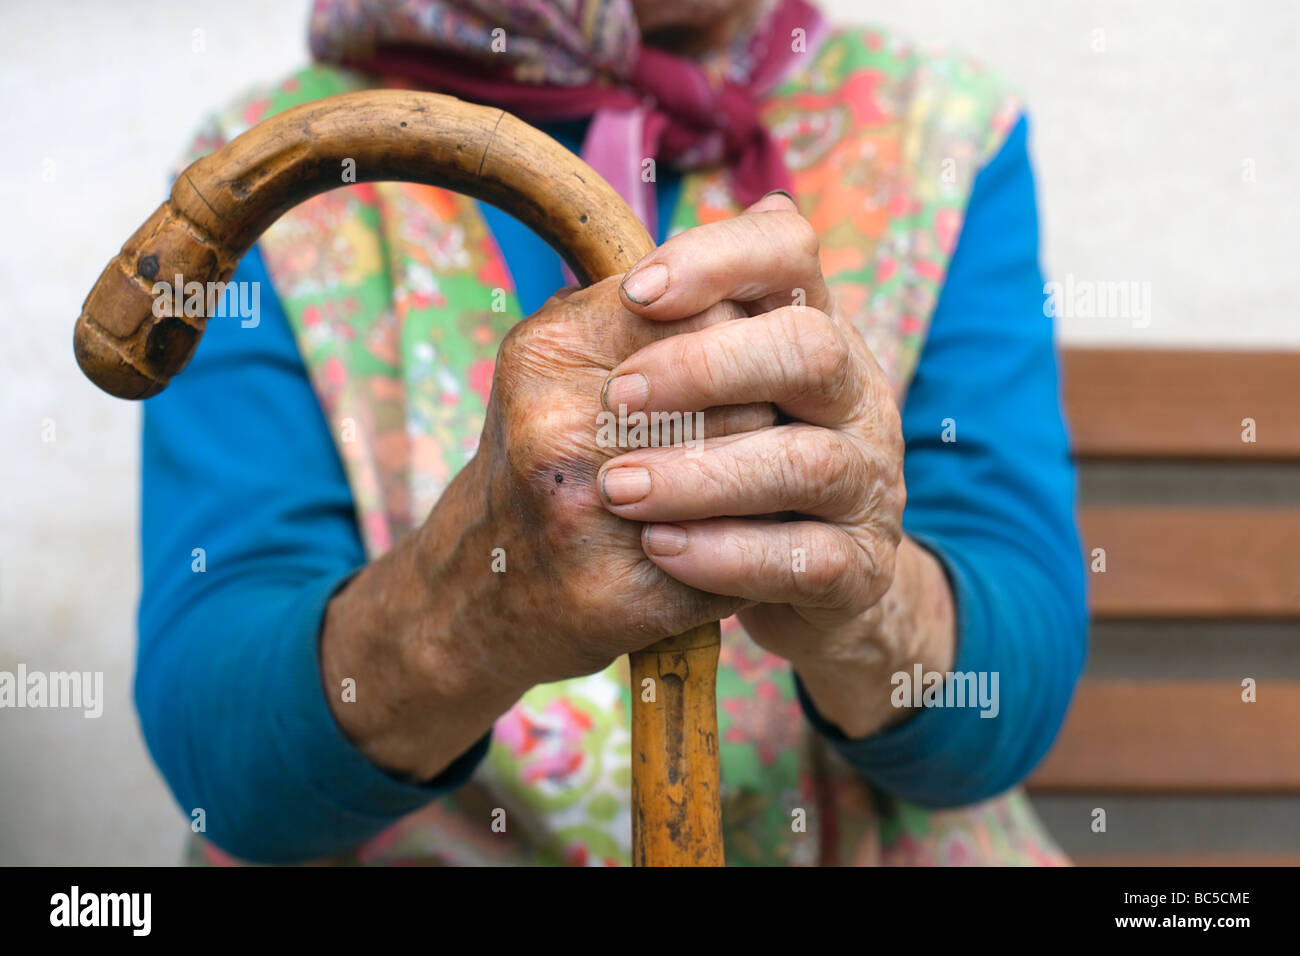 hand of an old peasant woman holding a walking stick Stock Photo